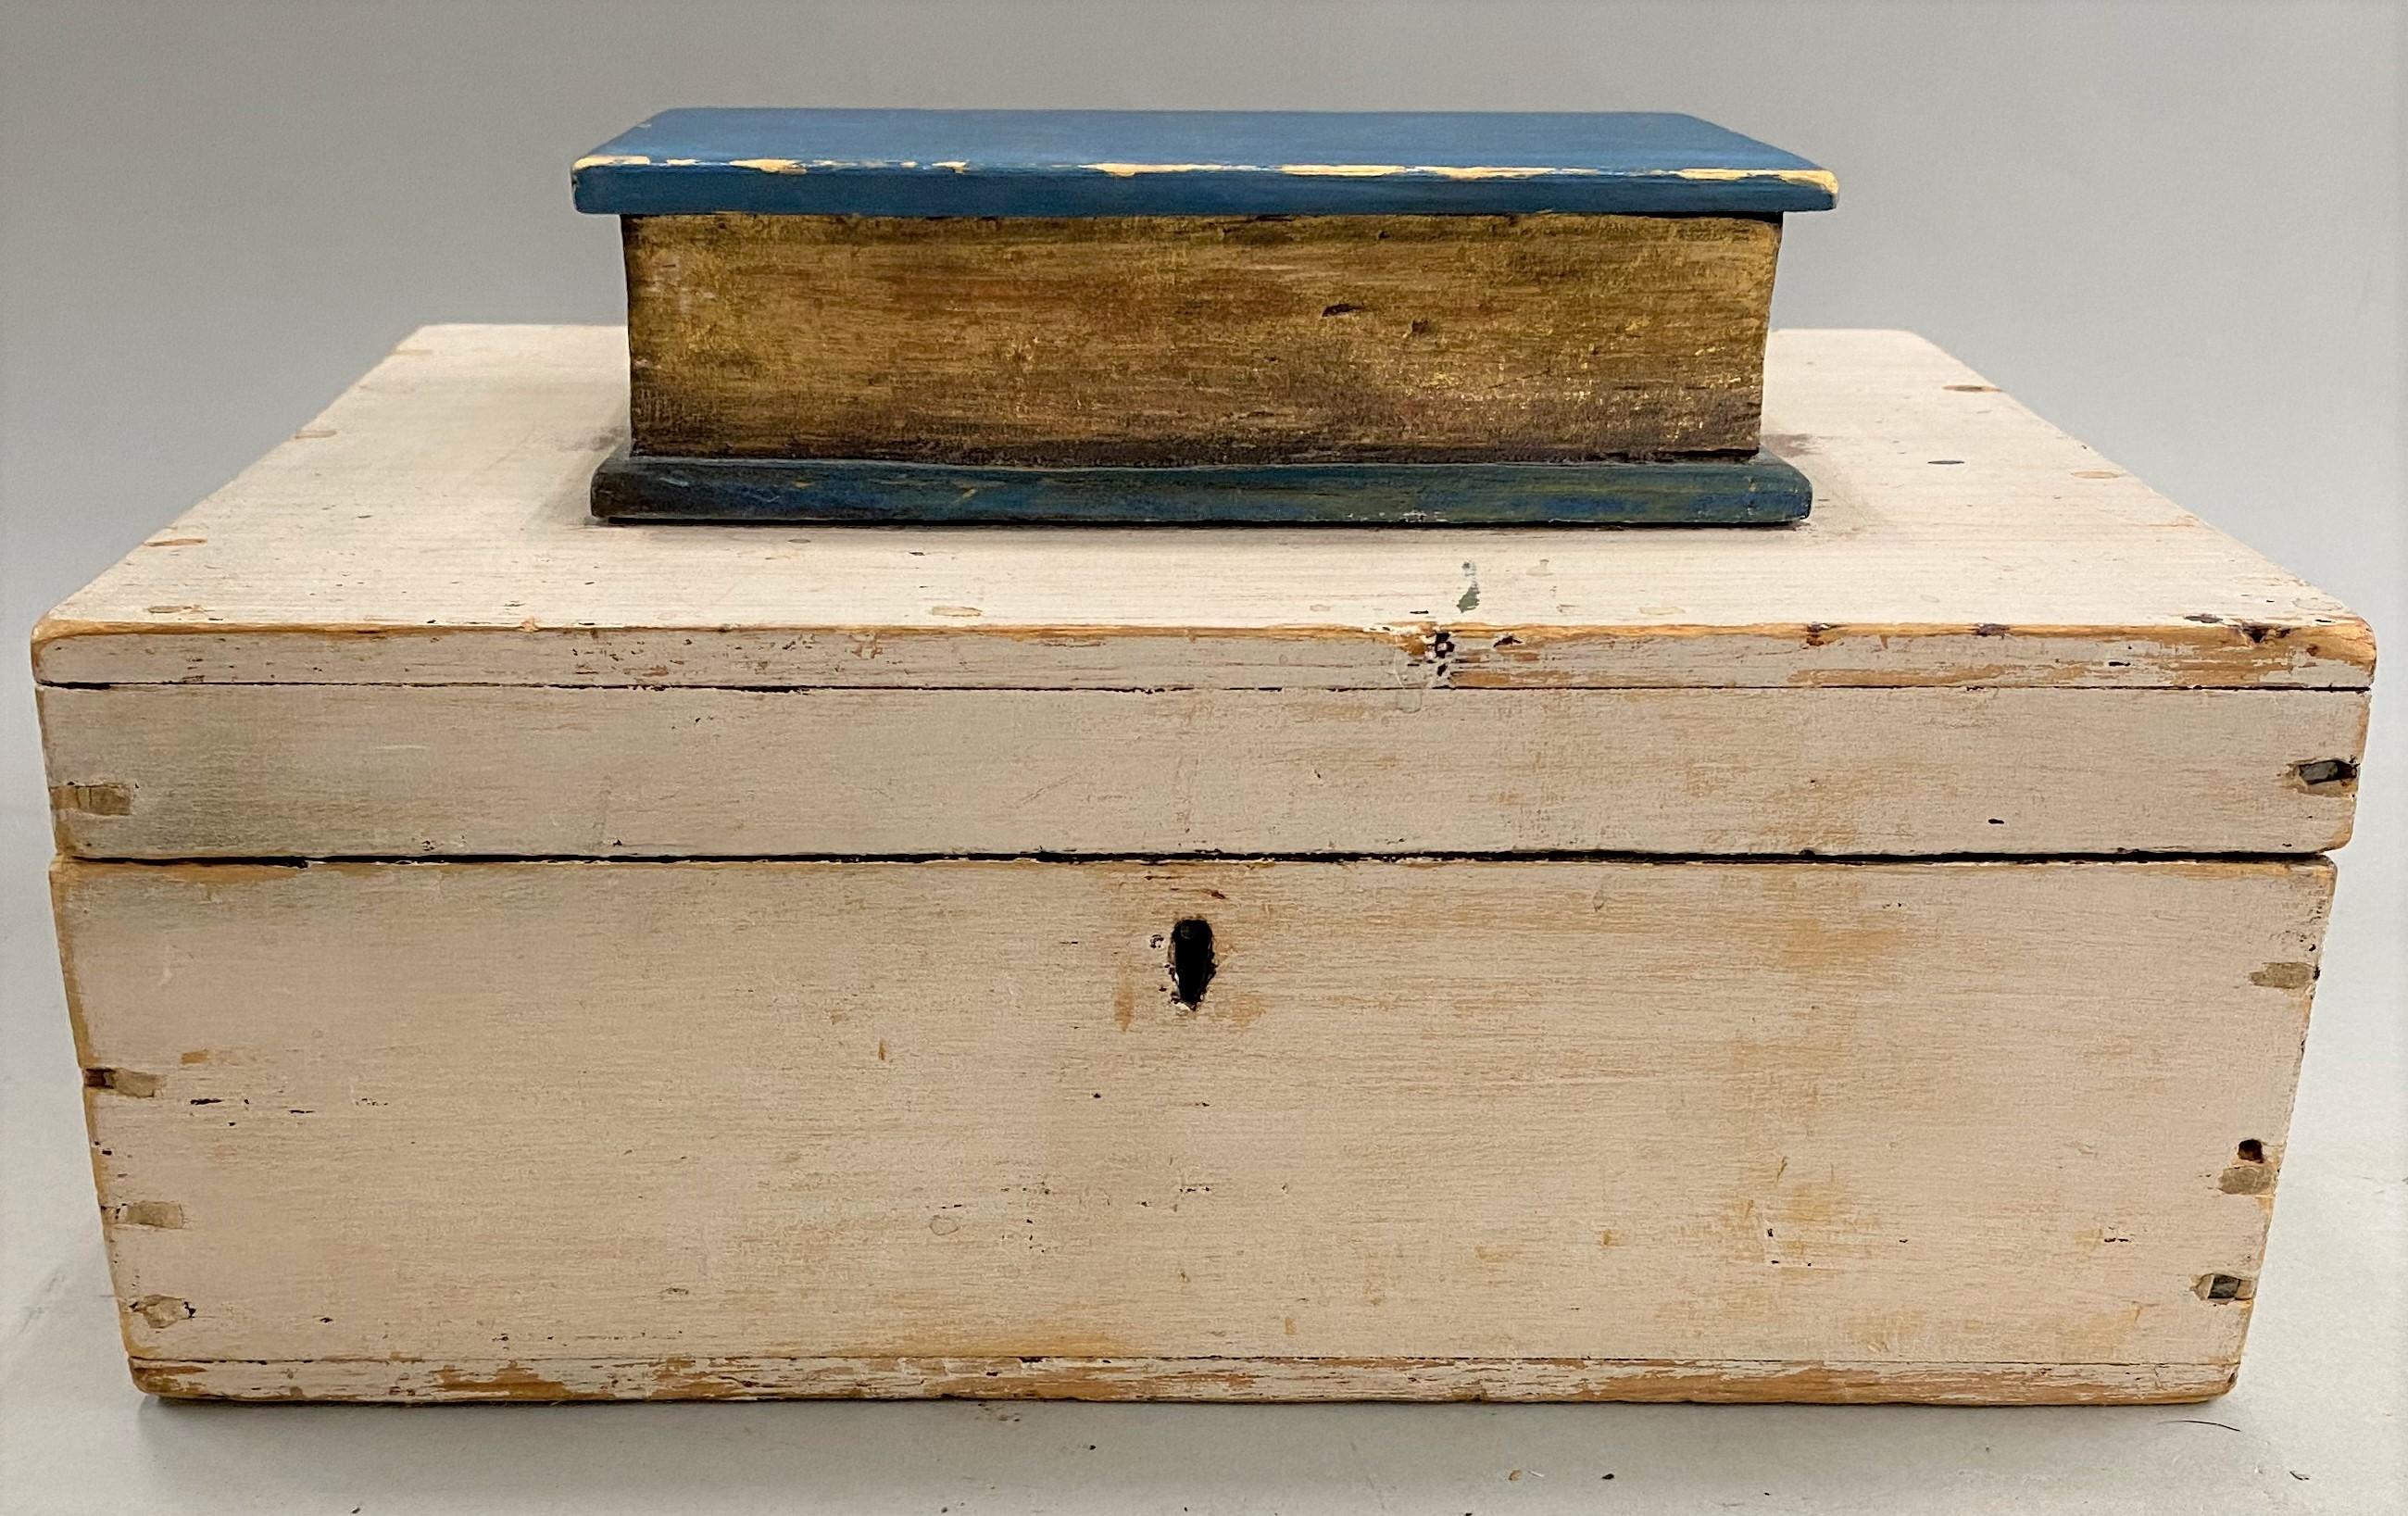 A fine wooden box with applied carved book on its top, all in original paint, with period wallpaper lining, American in origin, circa 1820. Possibly made as a wedding gift. The box has great overall patina and character, with minor rubs, losses, and